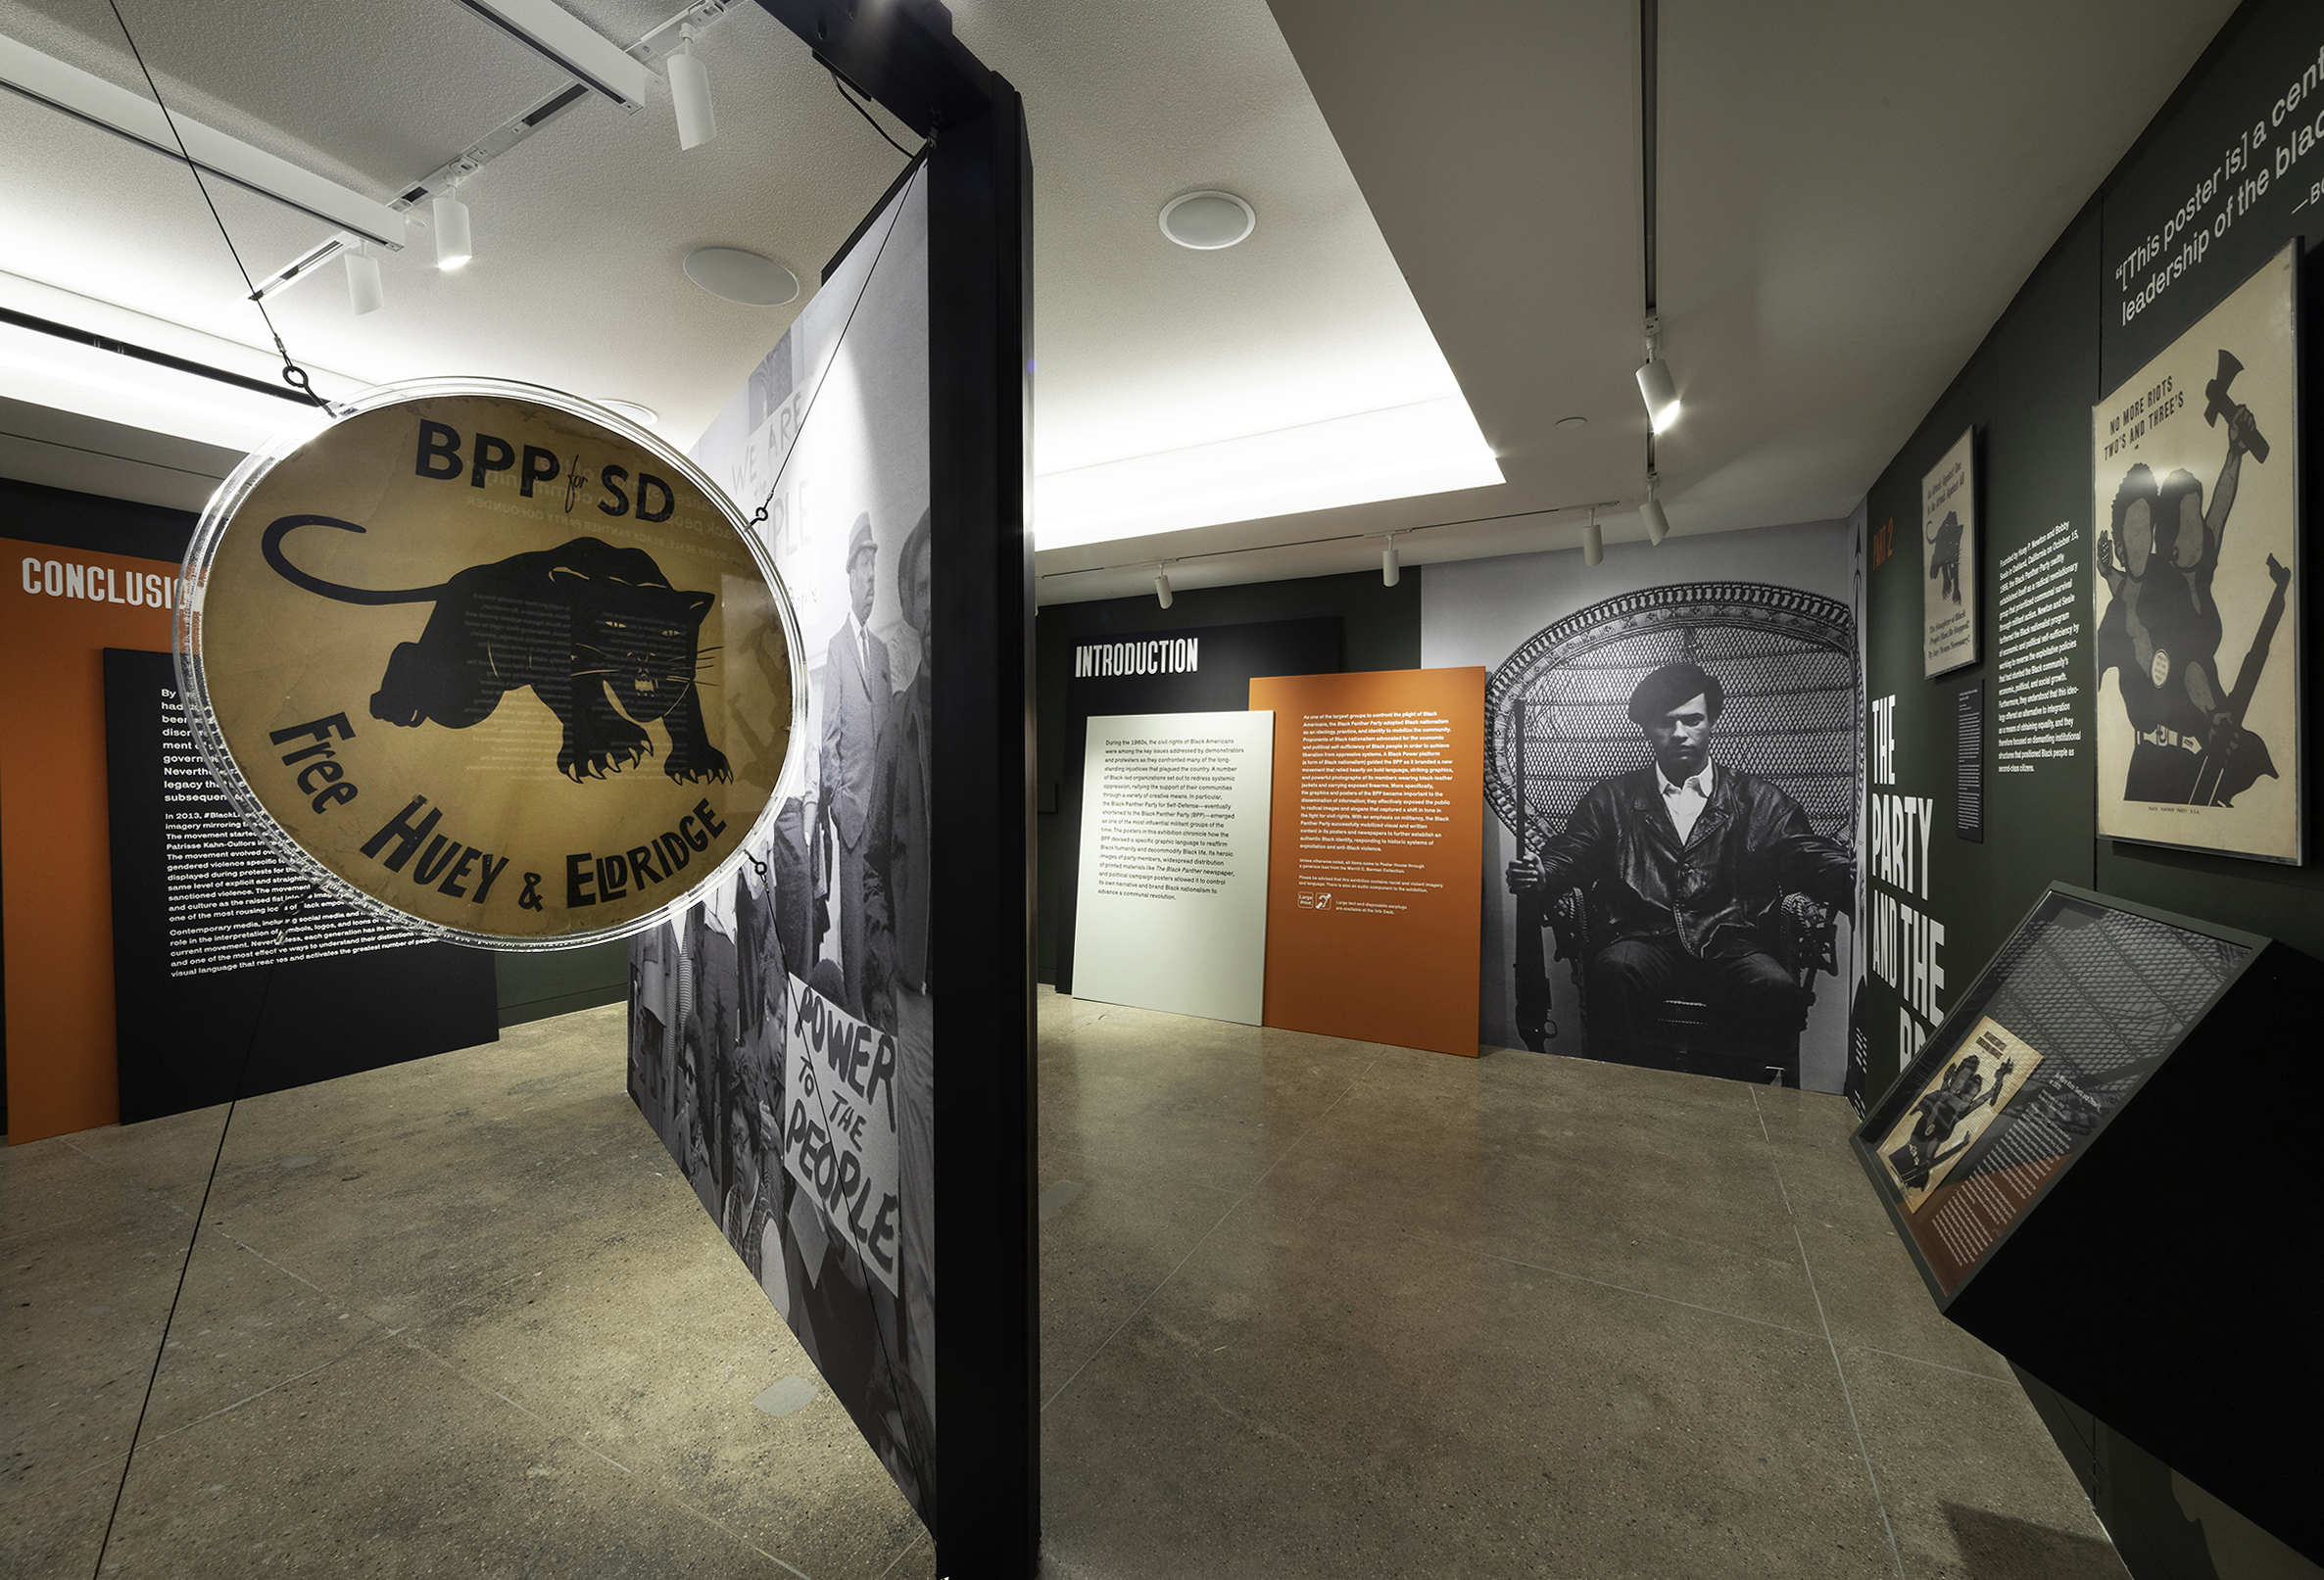 A view of part of a a room depicting a Black Panther exhibition.